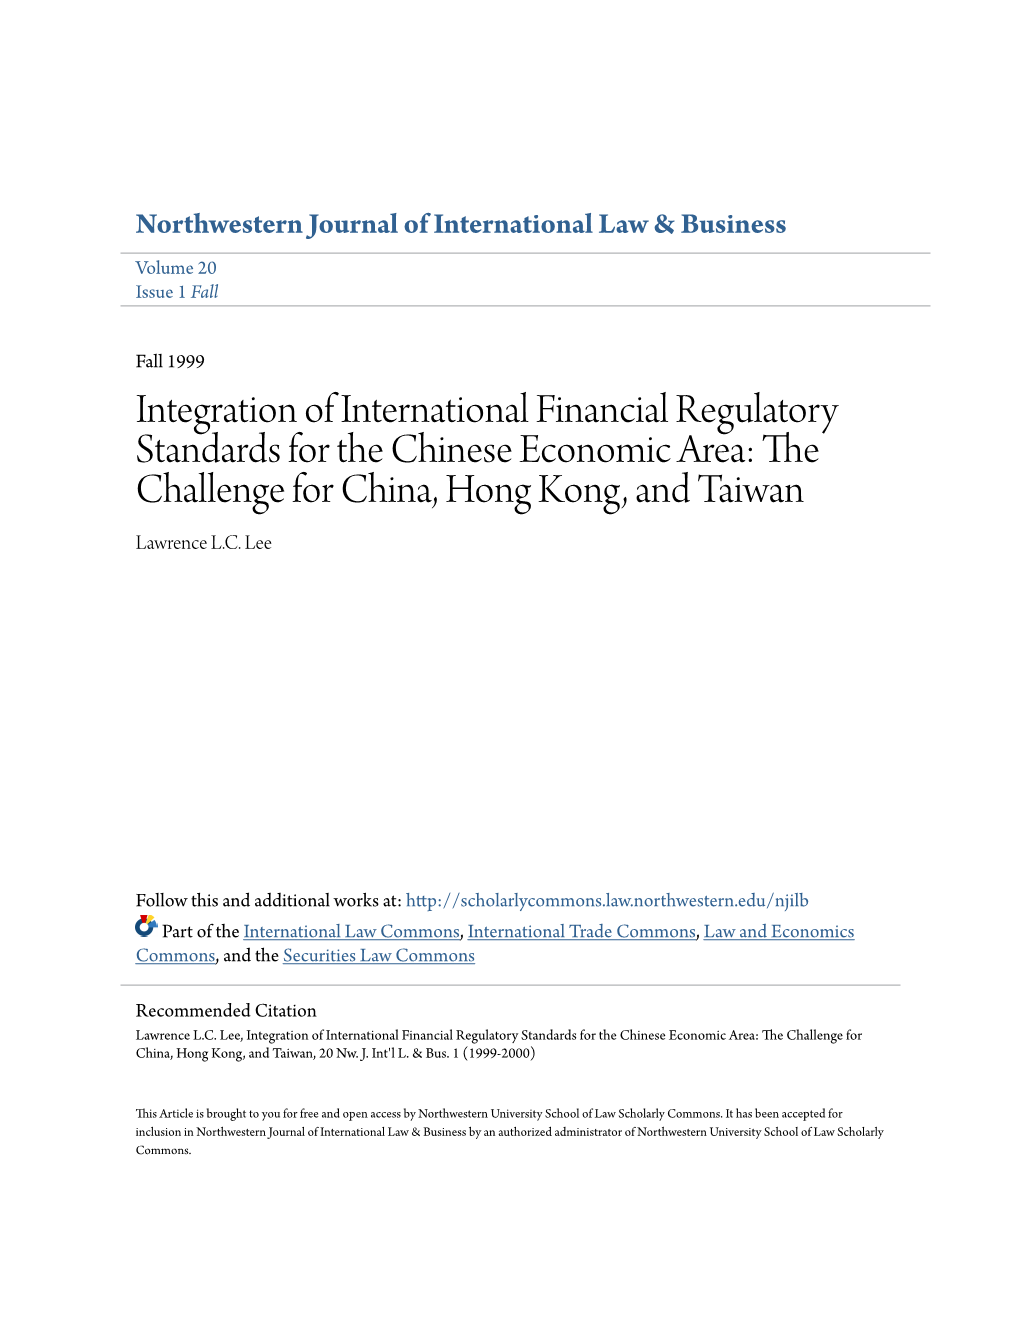 Integration of International Financial Regulatory Standards for the Chinese Economic Area: the Challenge for China, Hong Kong, and Taiwan Lawrence L.C